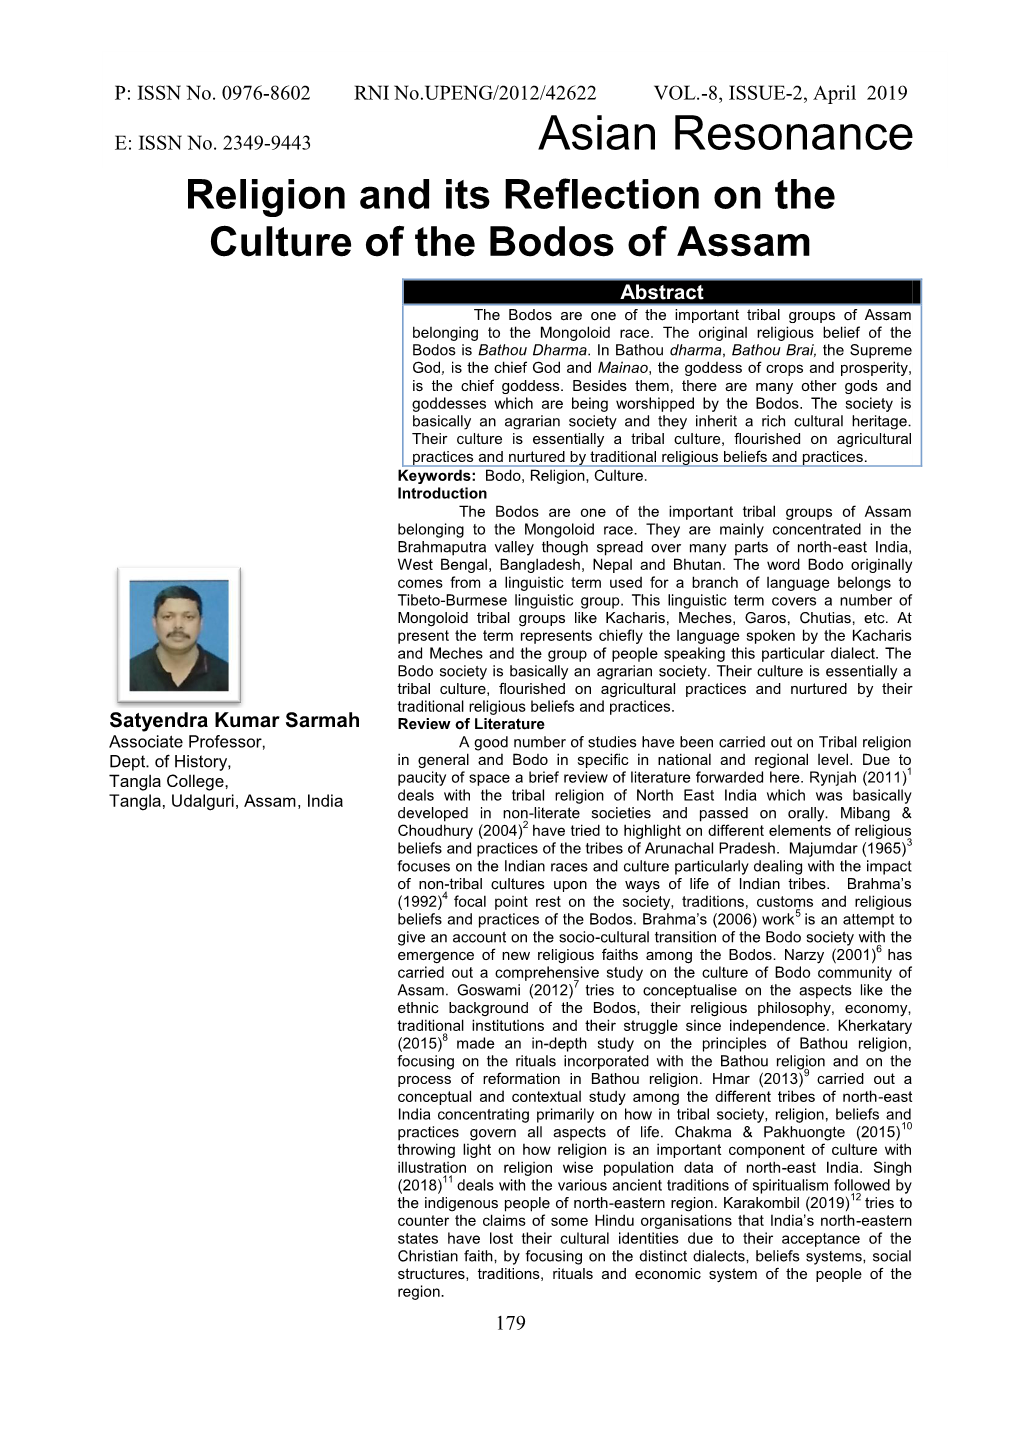 Religion and Its Reflection on the Culture of the Bodos of Assam Abstract the Bodos Are One of the Important Tribal Groups of Assam Belonging to the Mongoloid Race